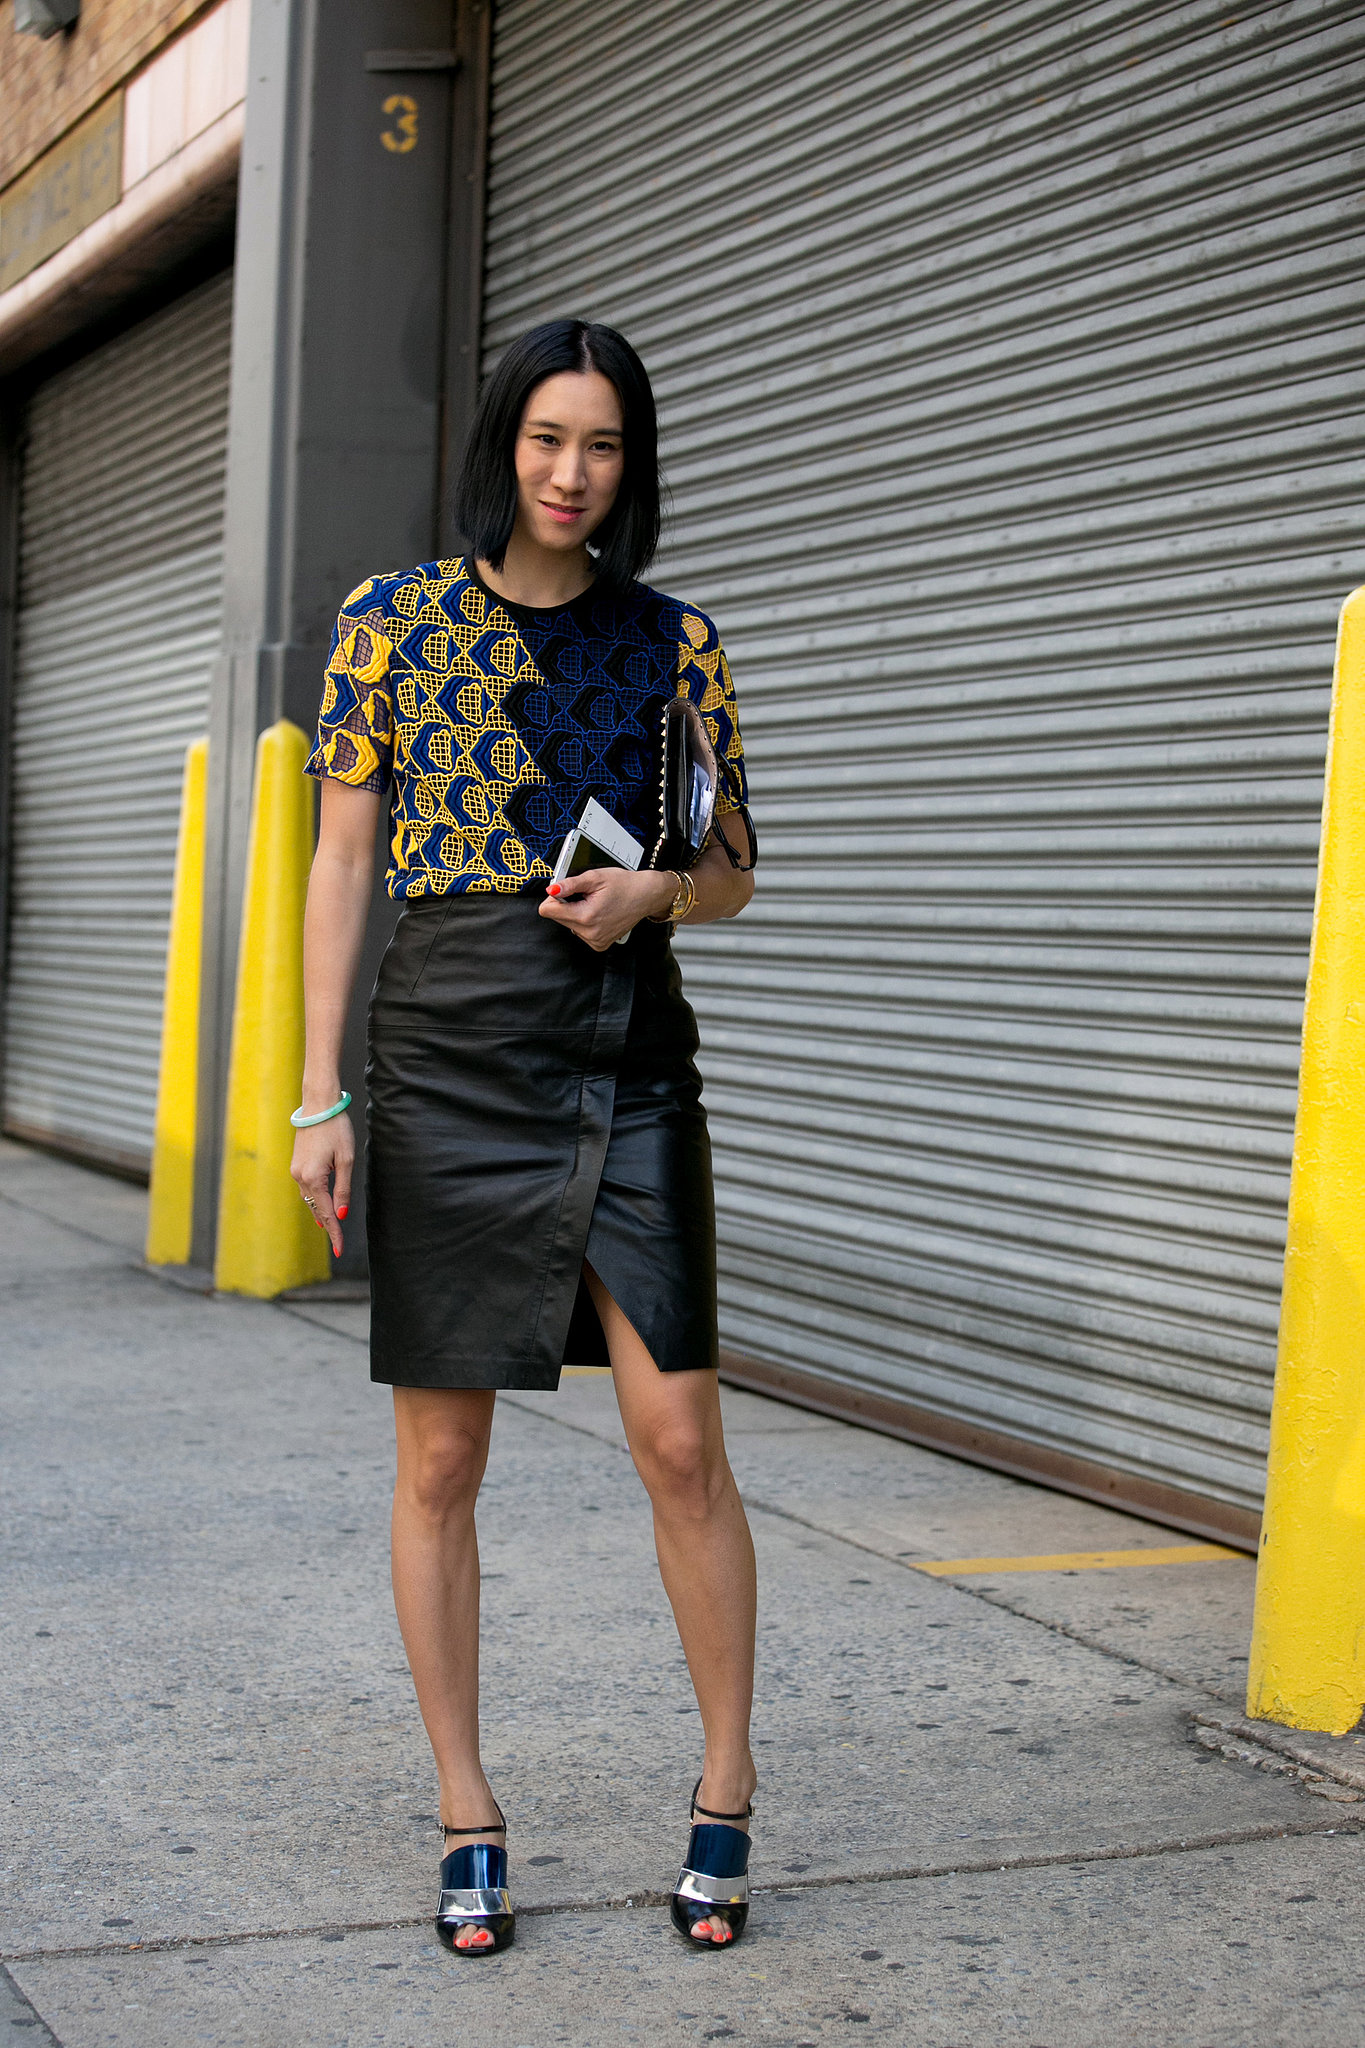 Eva Chen worked a little leather skirt and a statement printed top.
